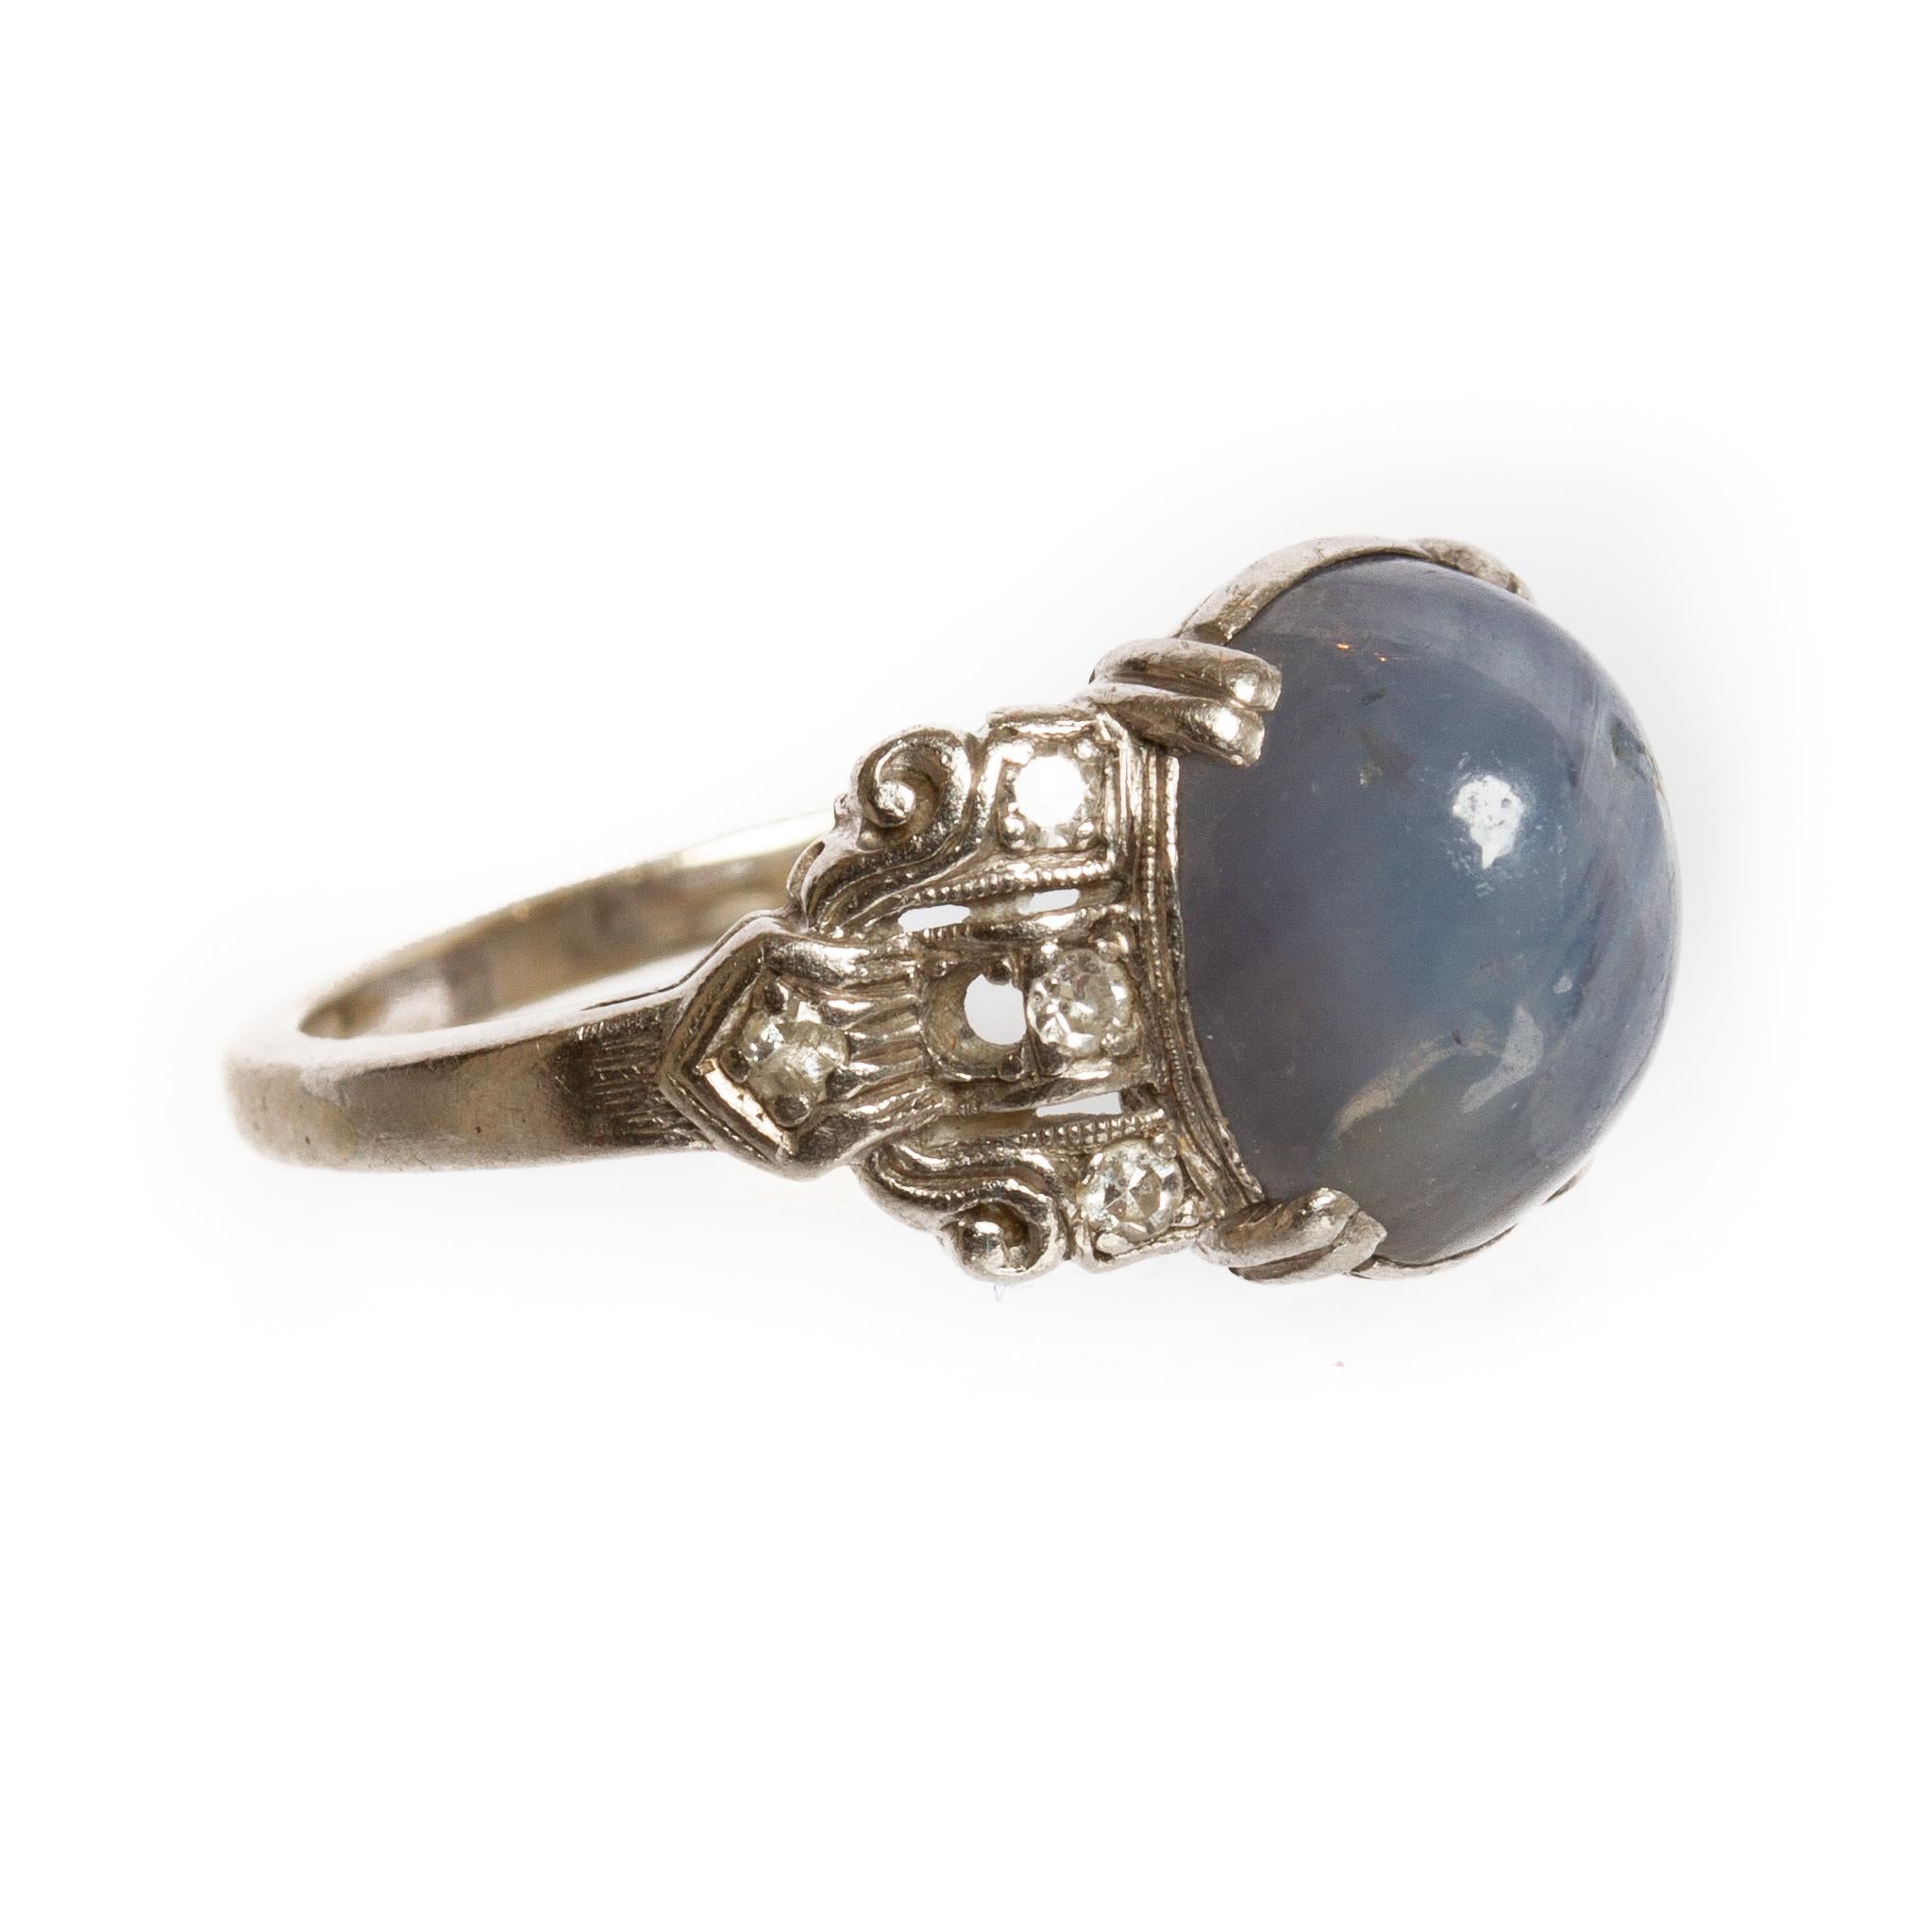 Offered is a vintage 6.3ct star sapphire, diamond and platinum ring size 5 and weighs 3 DWT